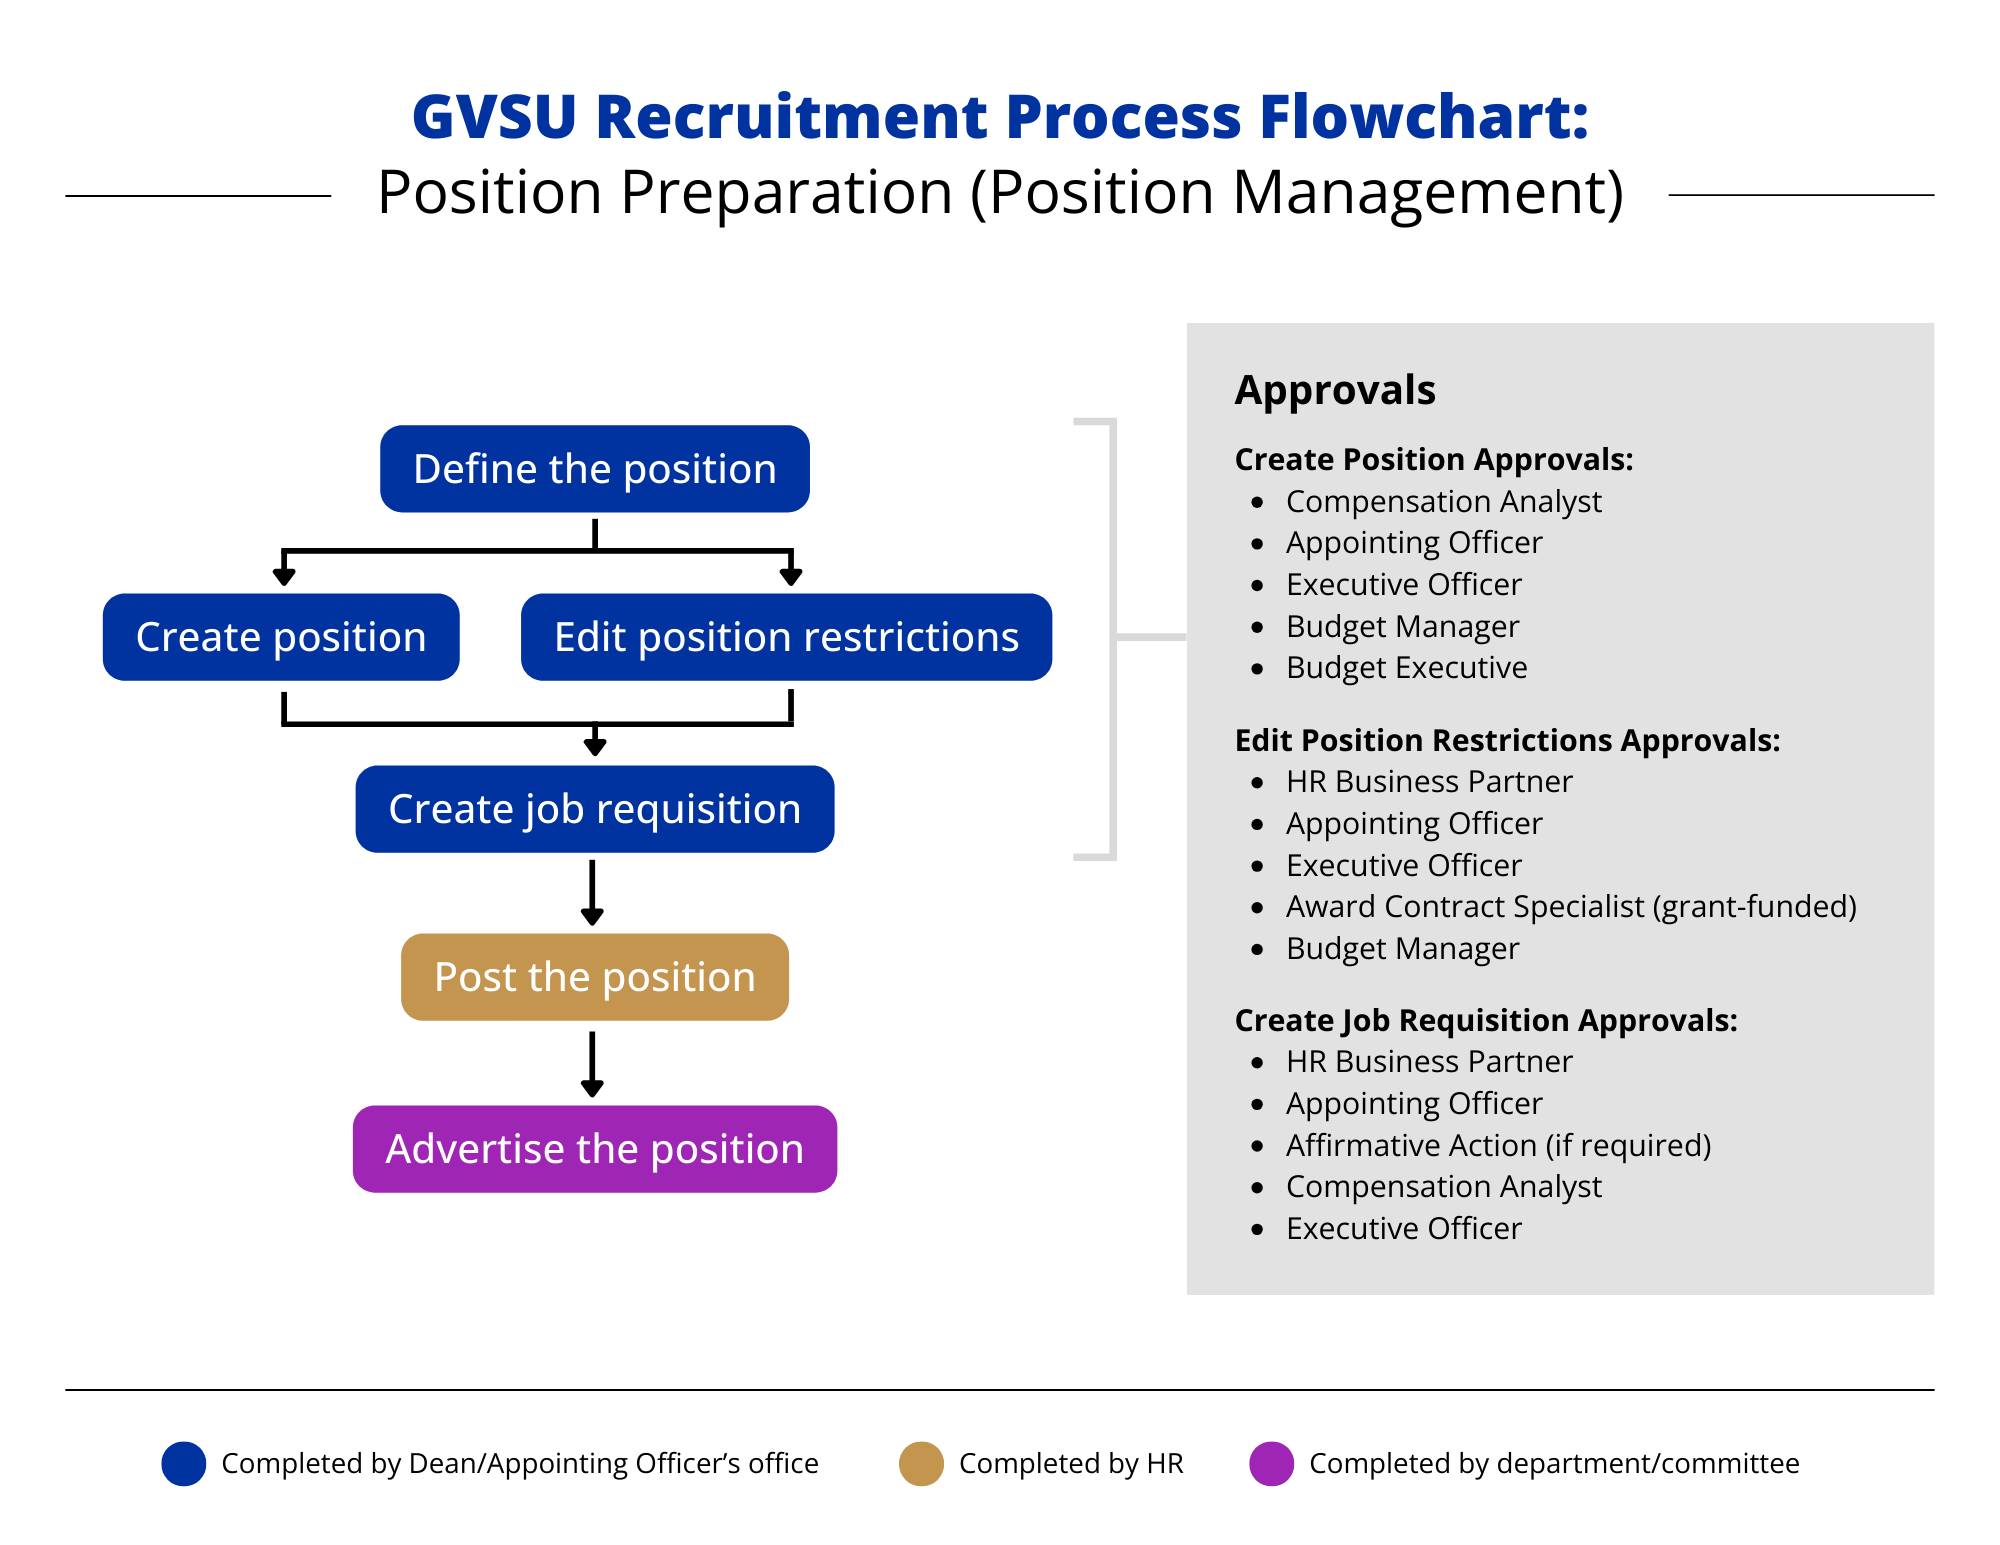 Flowchart explaining the steps within Position Preparation, stage one in the recruiting process